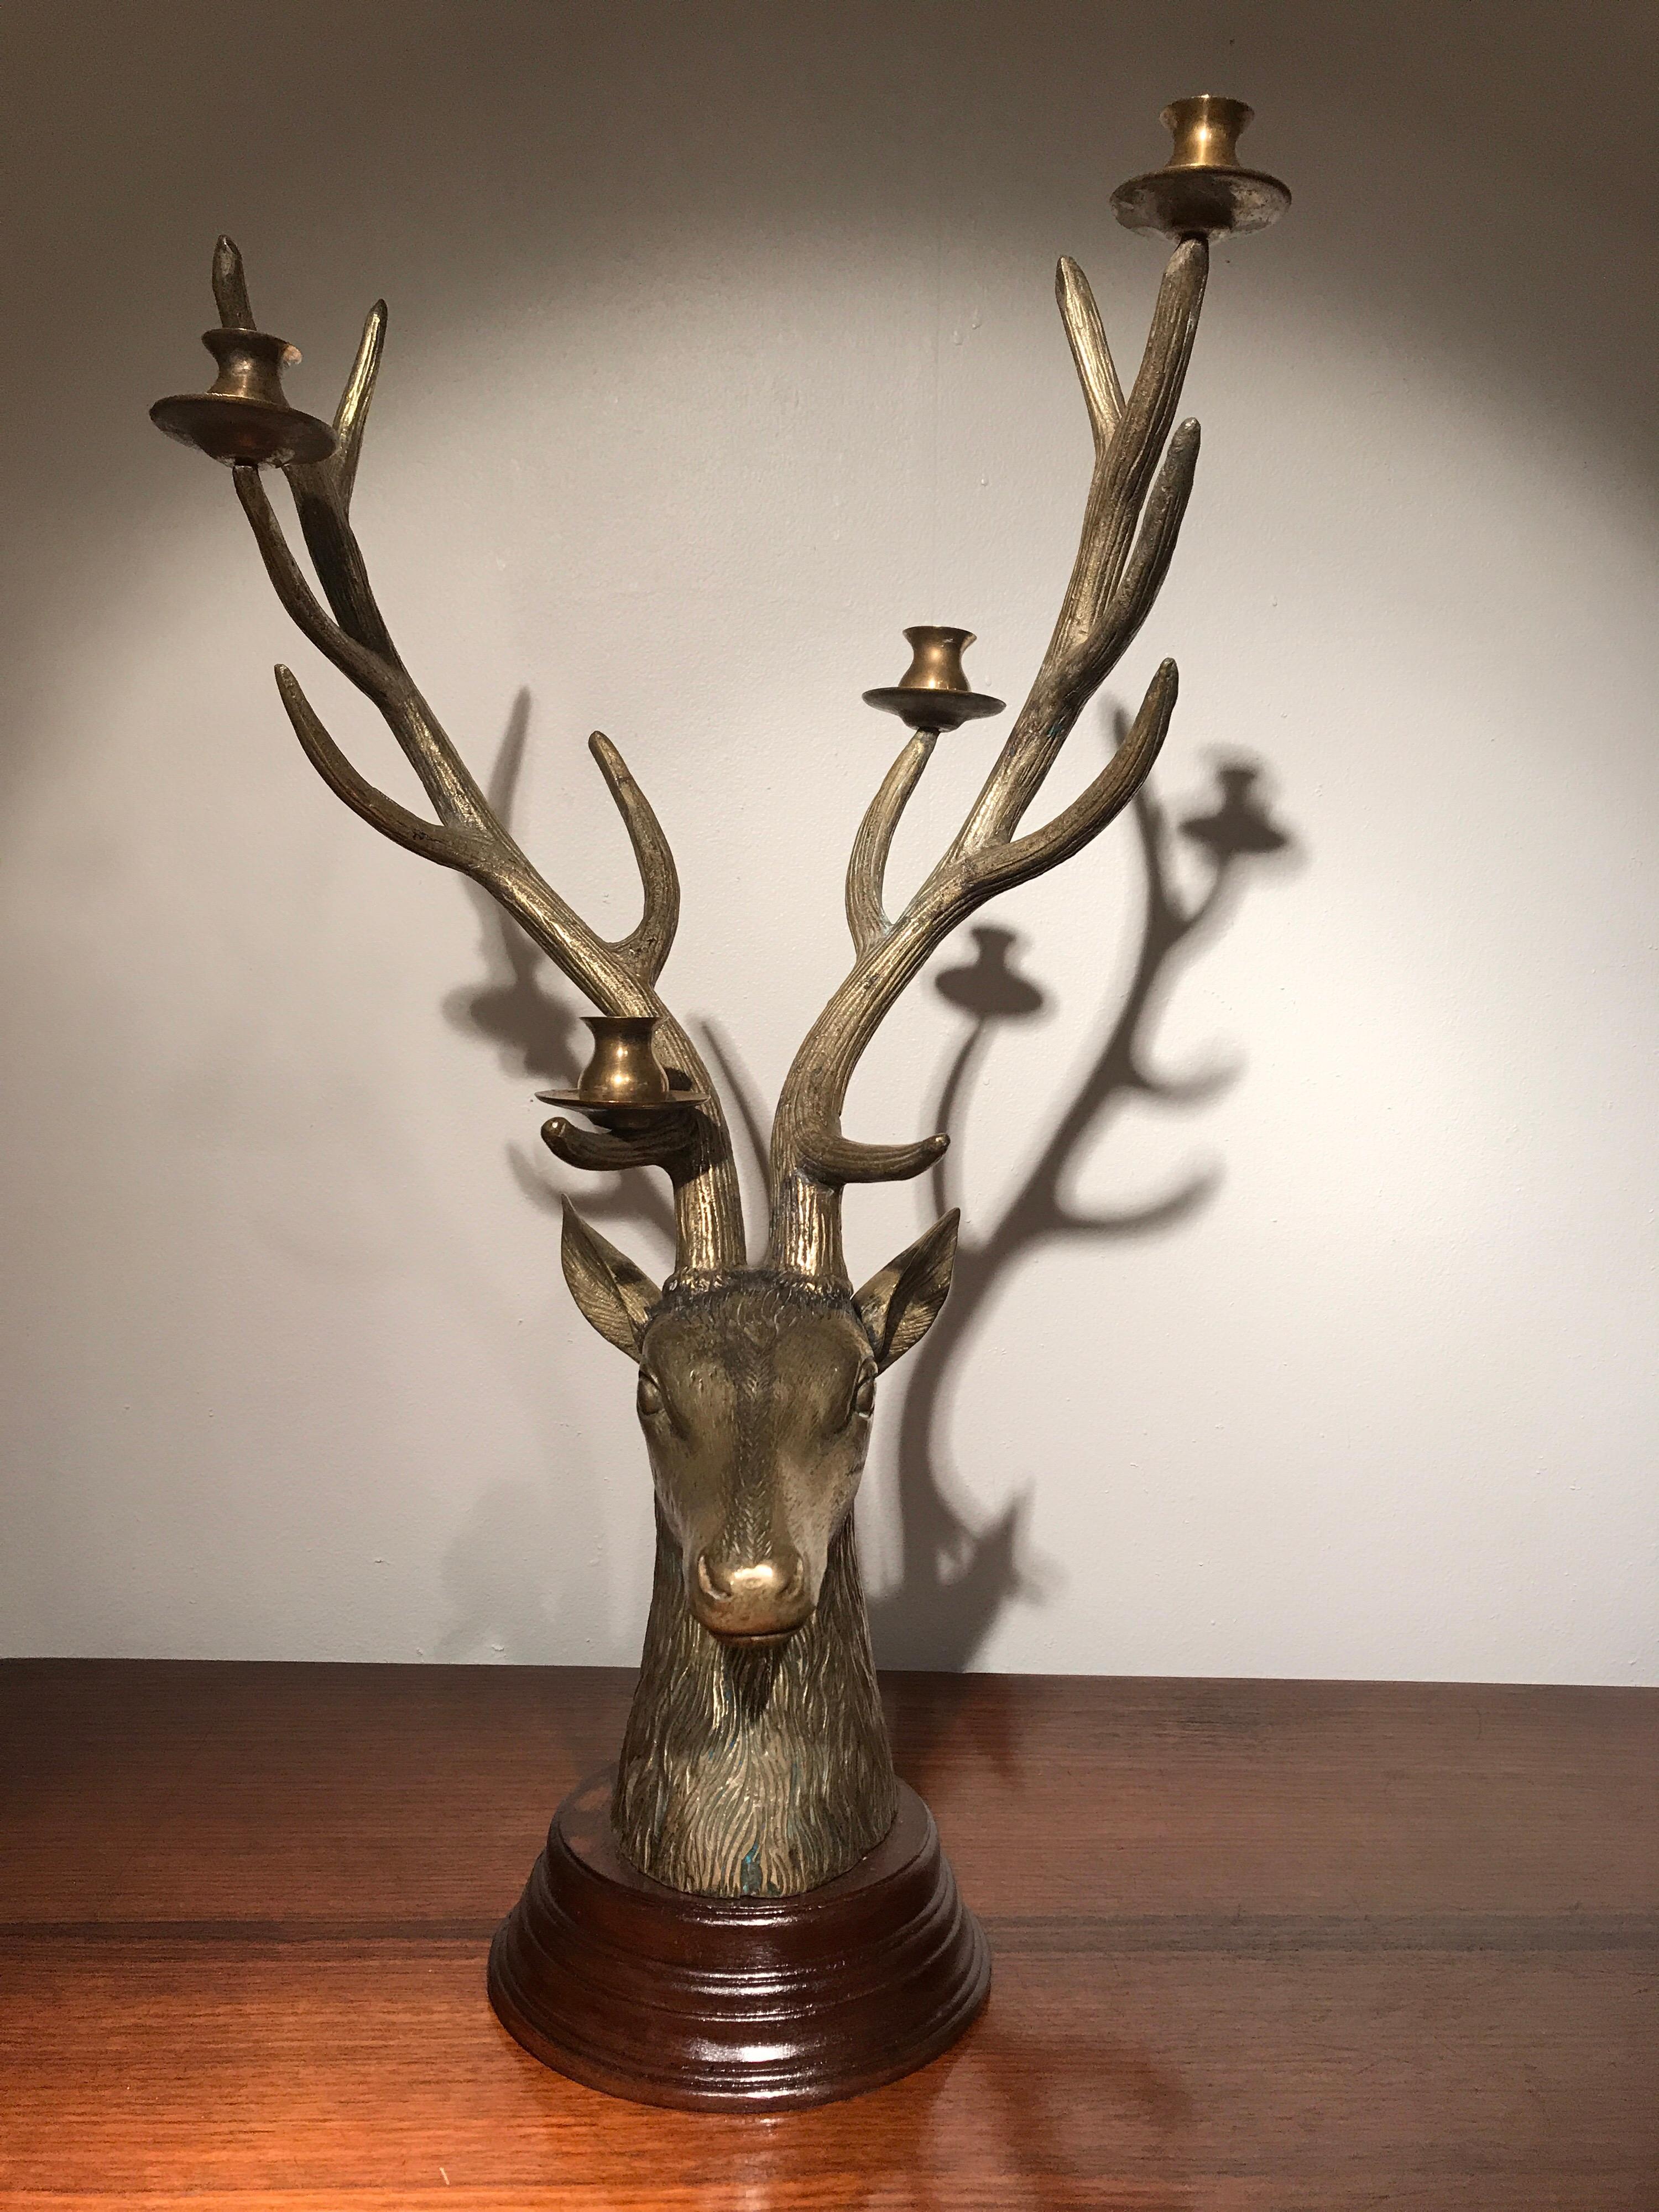 1970s silver plated bronze deer head candleholder by Christian Dior.